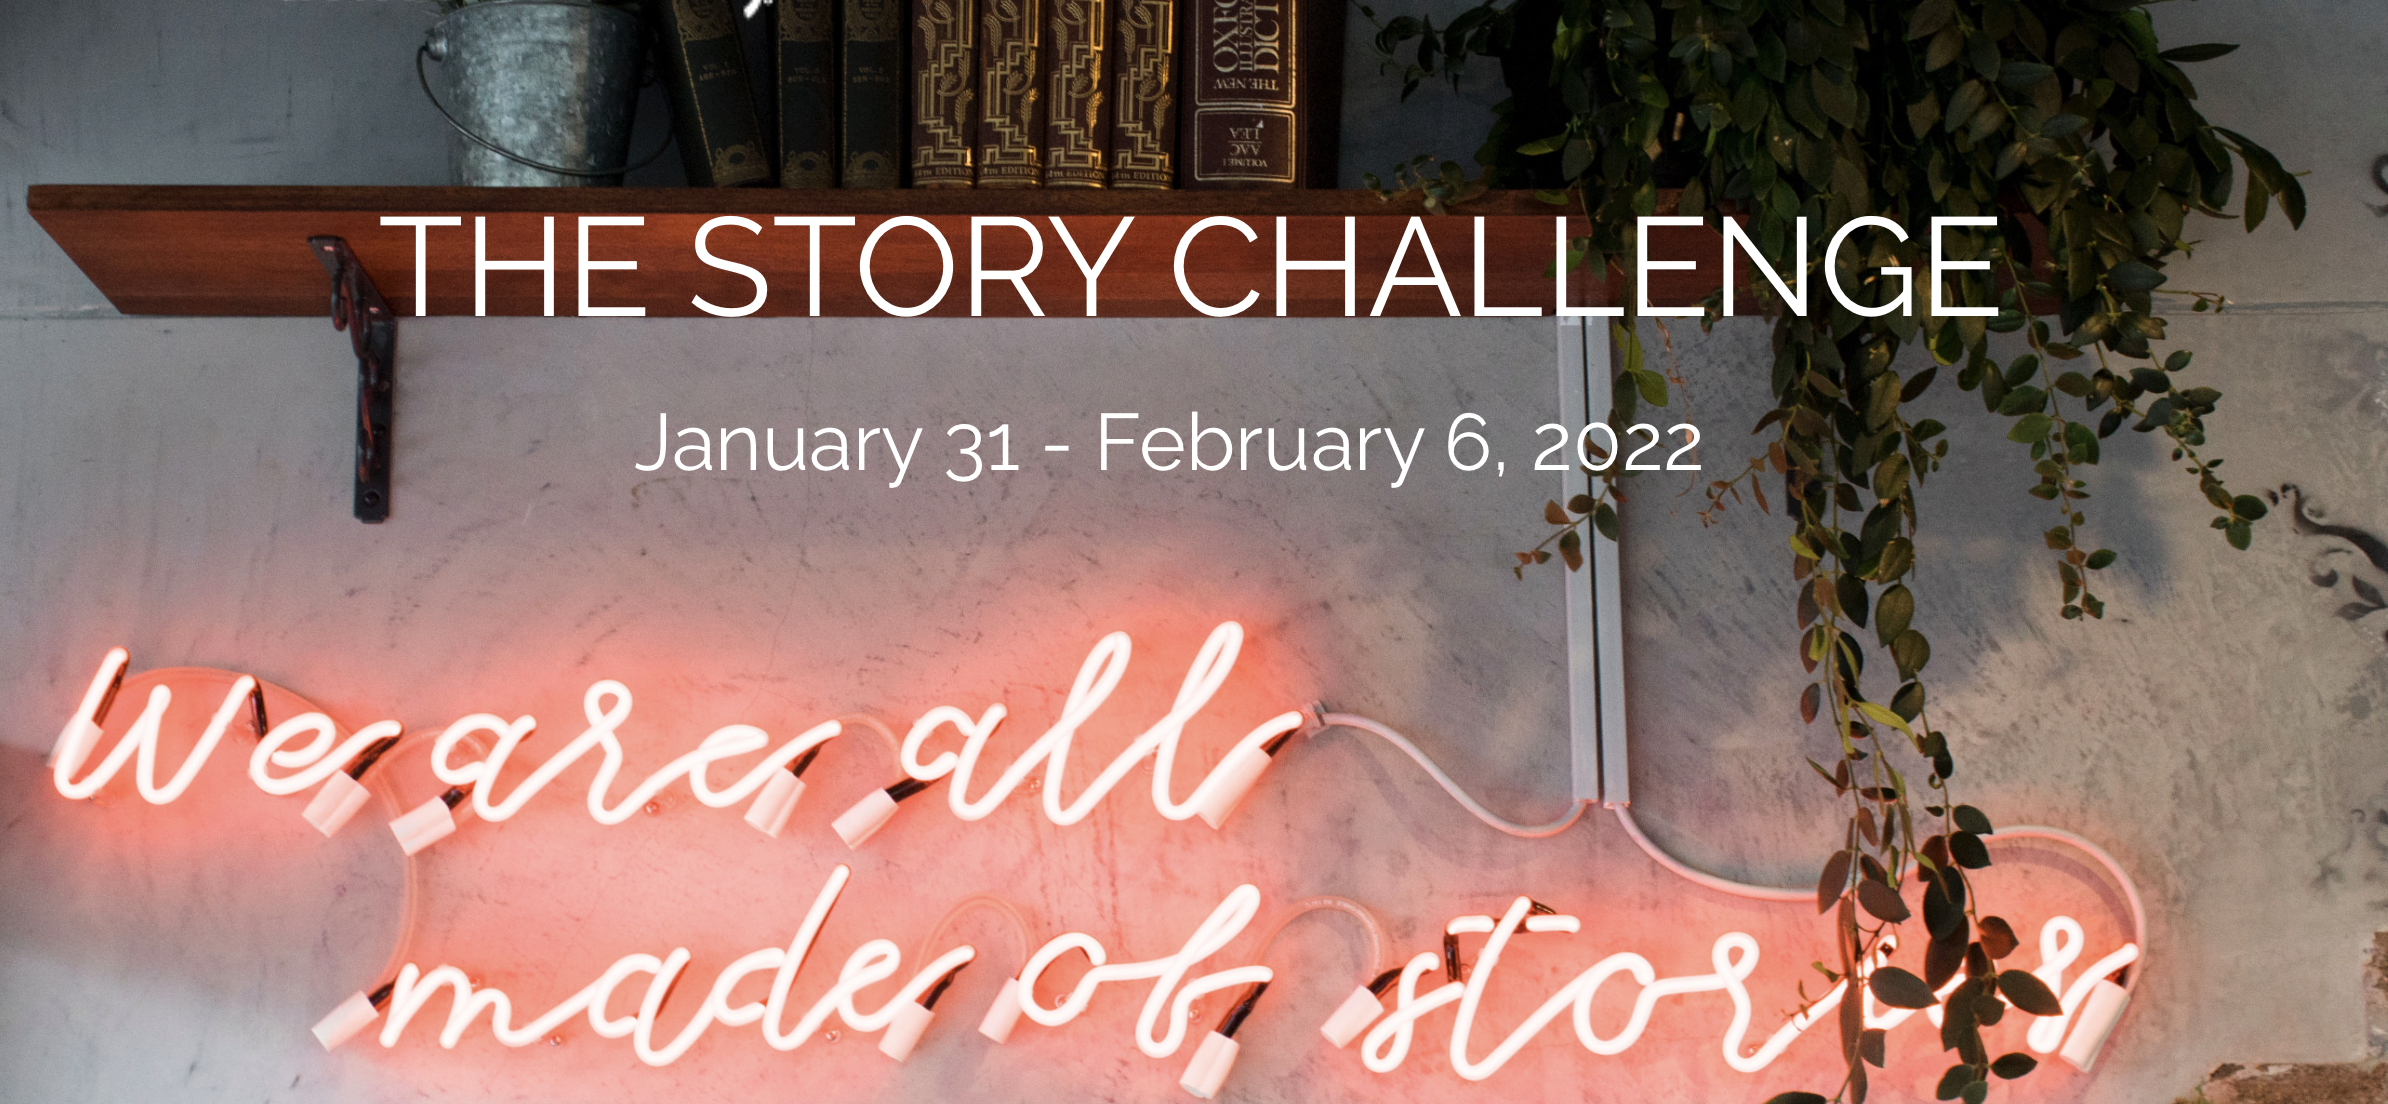 The Story Challenge 2022